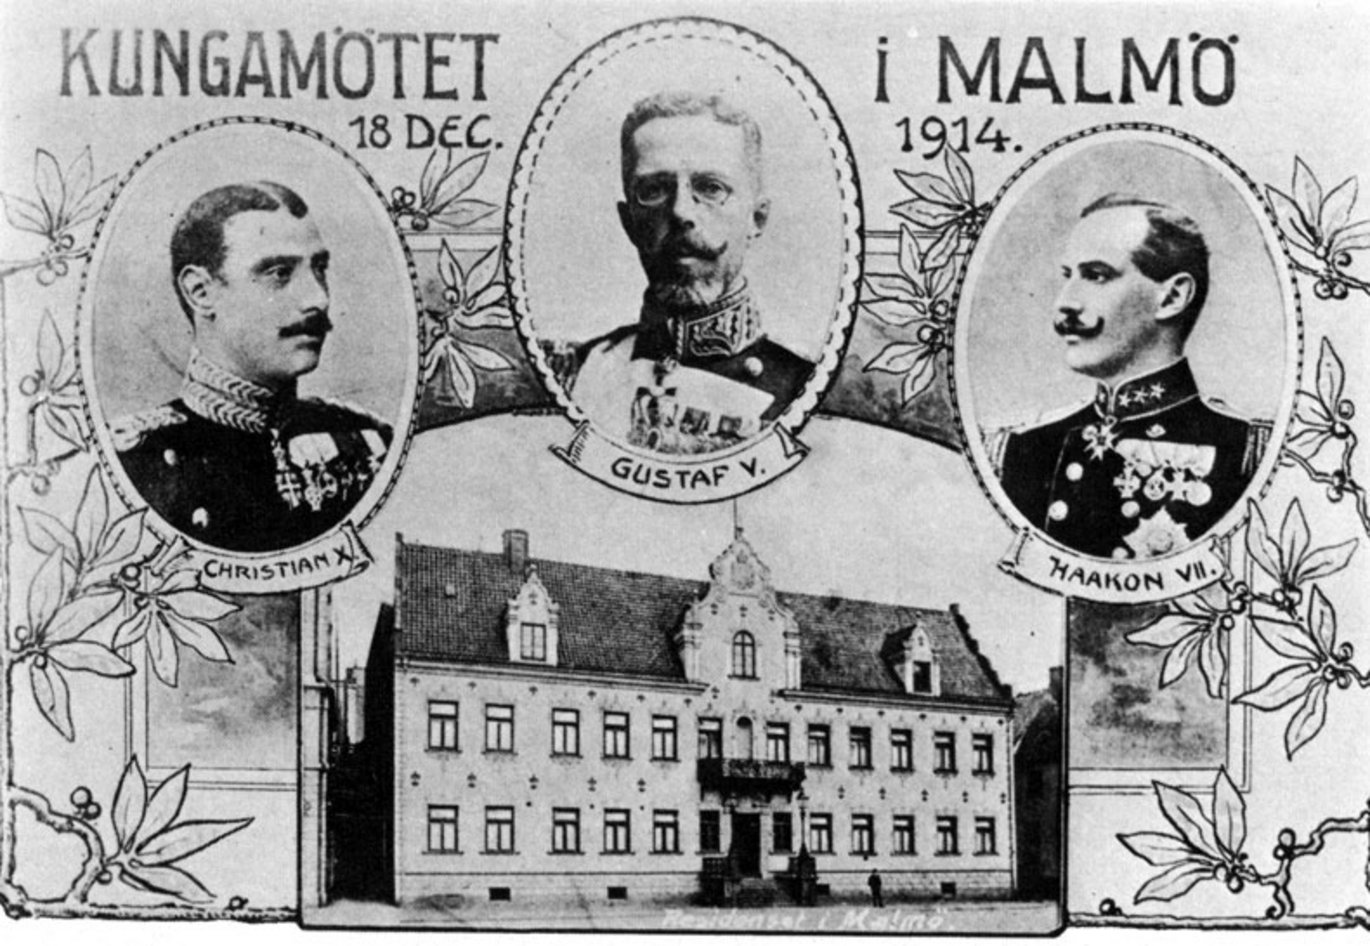 A photo card with the words 'Kungamötet i Malmö 18 Dec 1914' which means The Kings' meeting. There are three portraits next to each other of each the Kings along with their names. At the bottom, you can see the building in which they met.